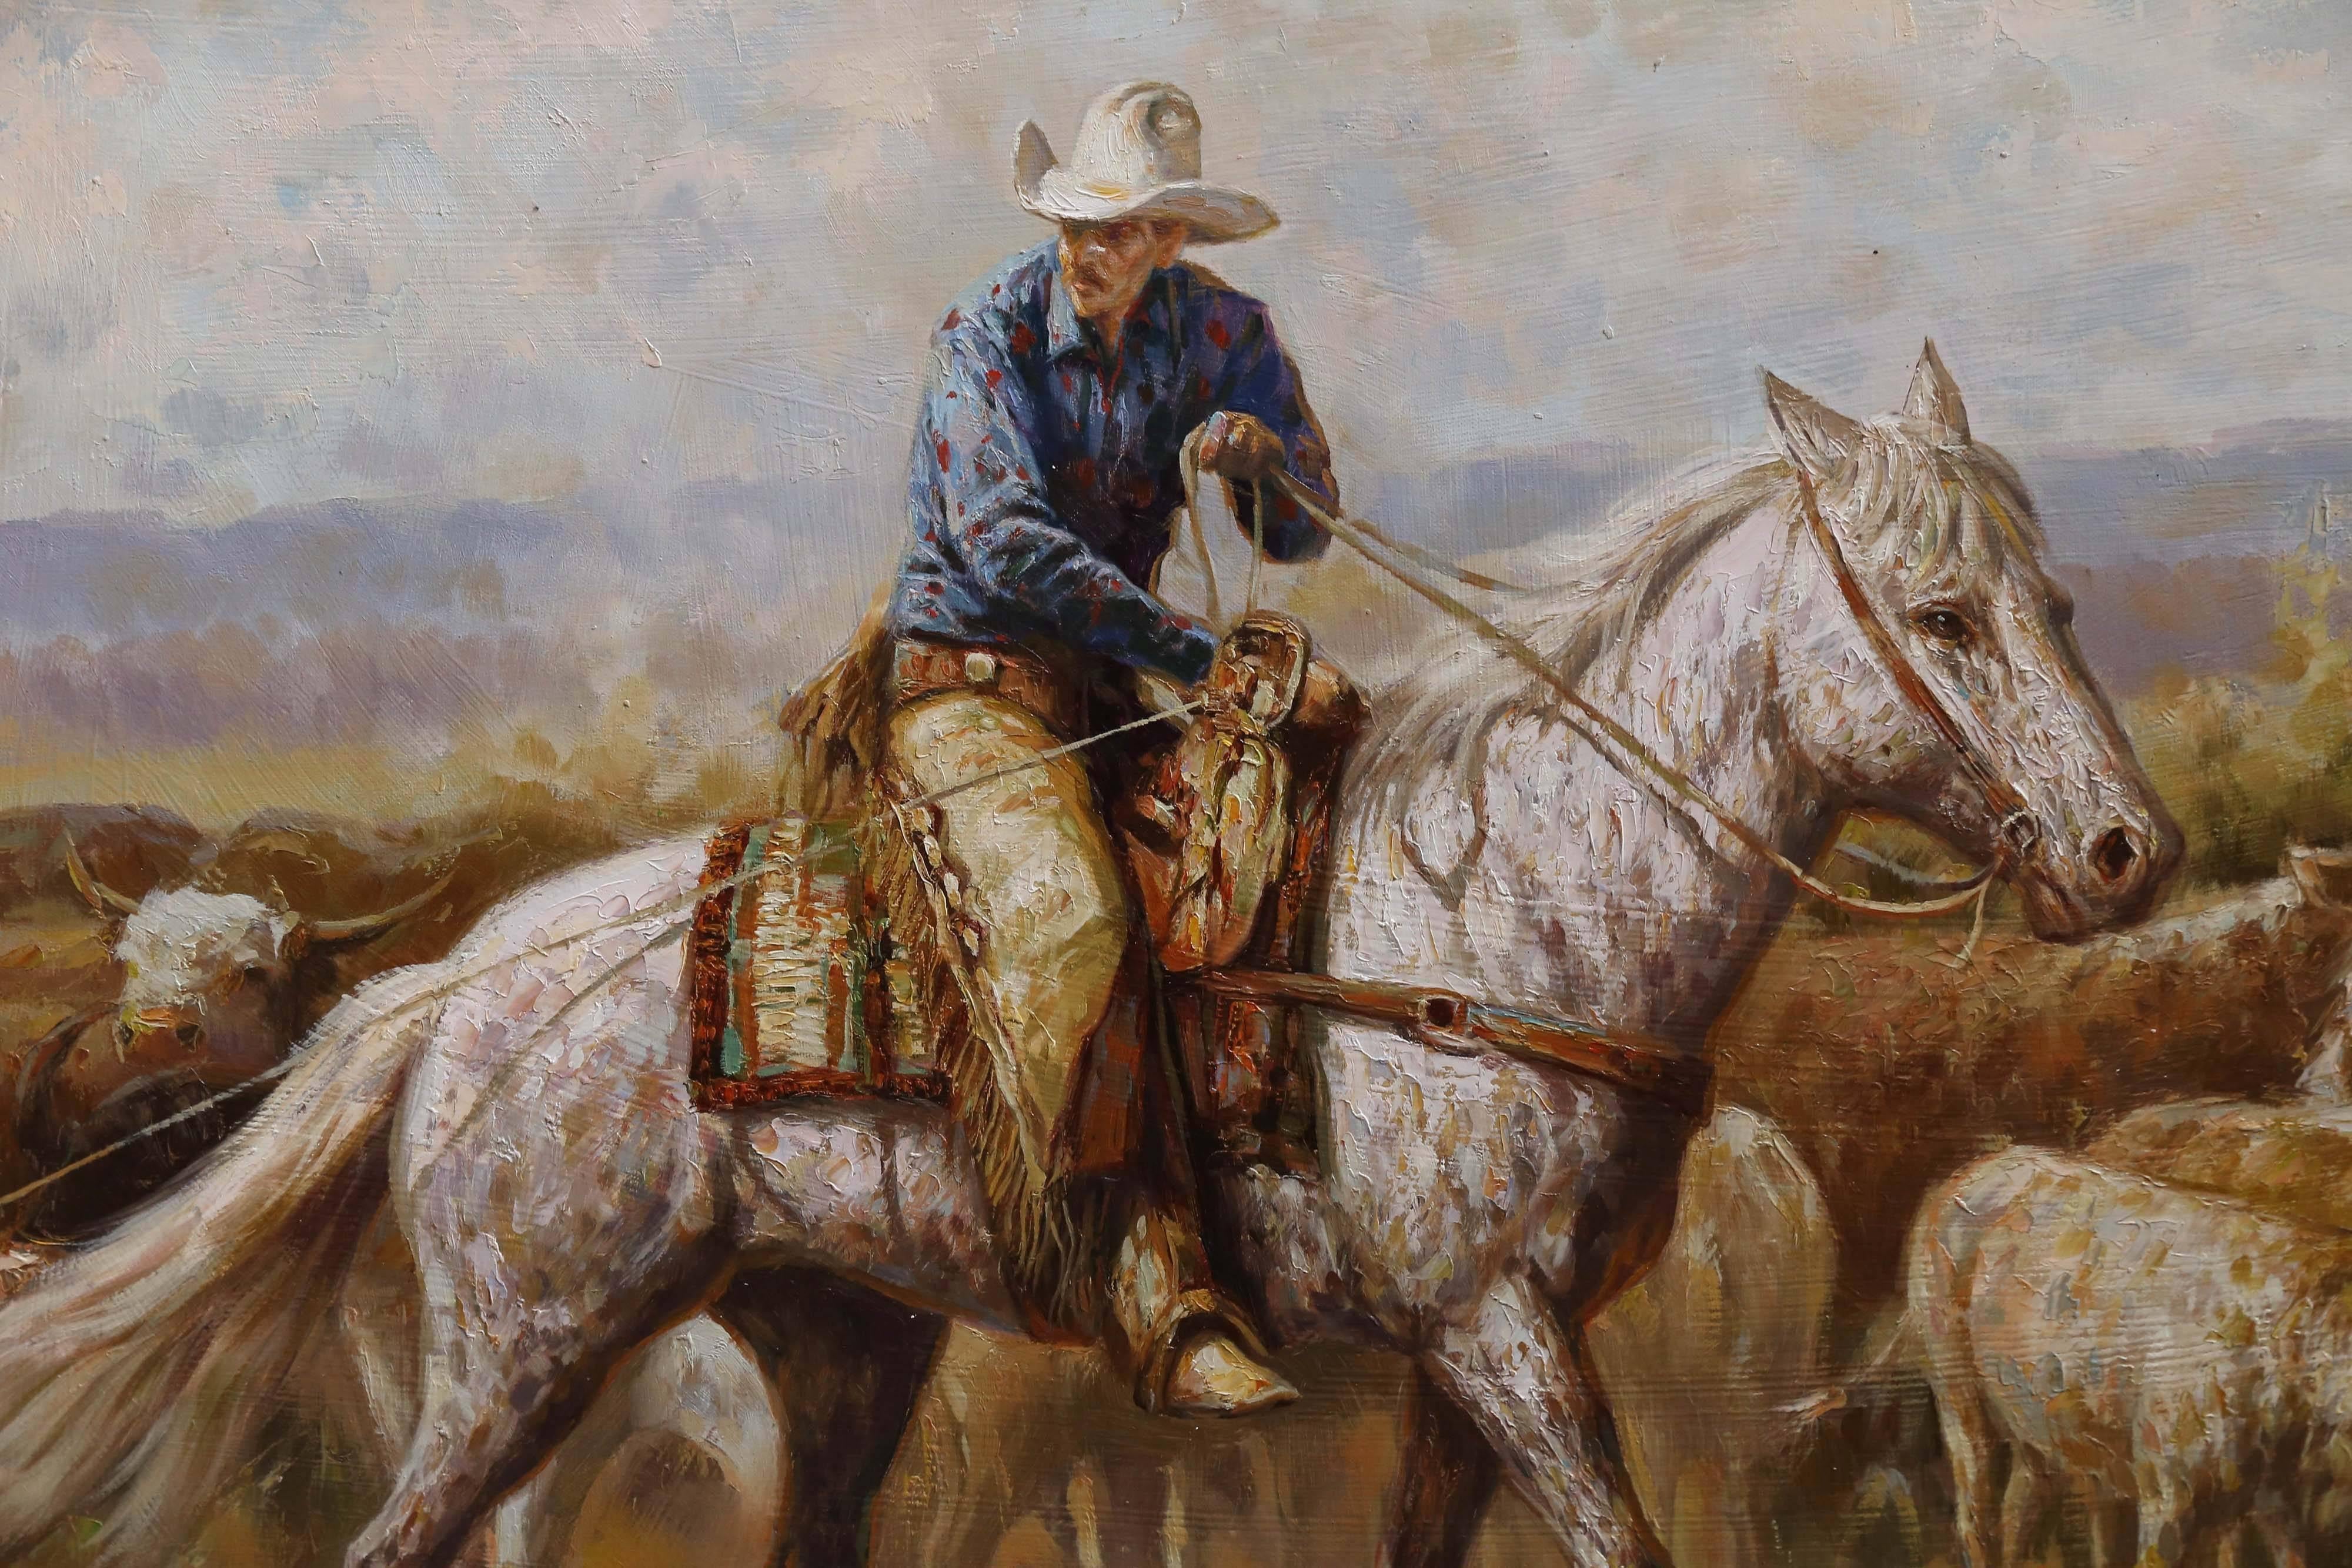 Cowboy painting by Troy Denton, signed lower left. Oil on canvas
Showing an action painting of a cowboy roping a calf
Lovely colors and a beautiful sky with mountains in the background.